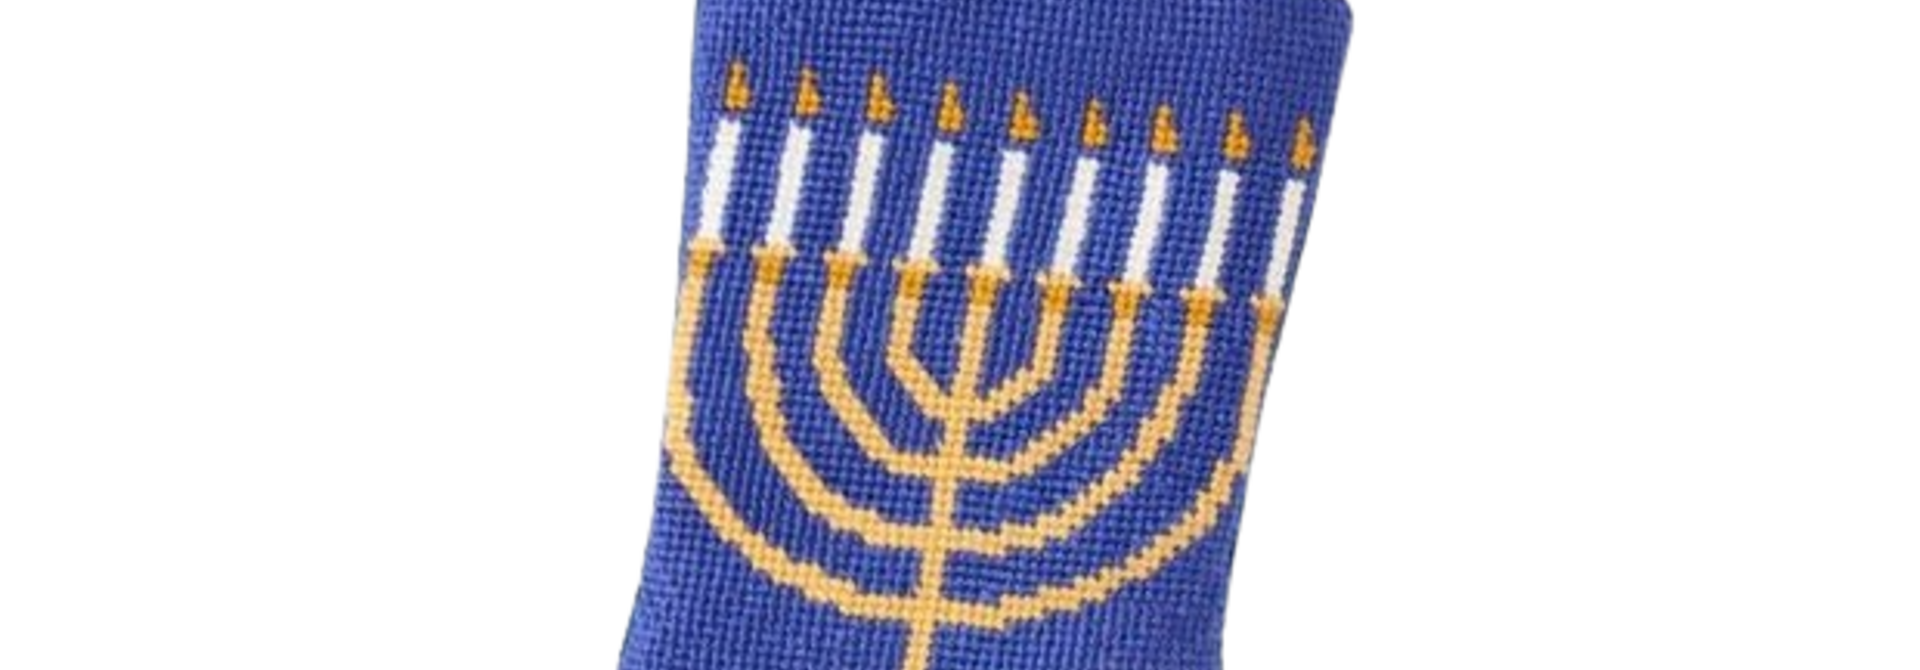 Light the Menorah | The Bauble Stockings Collection - 4.25 Inch x 6 Inch